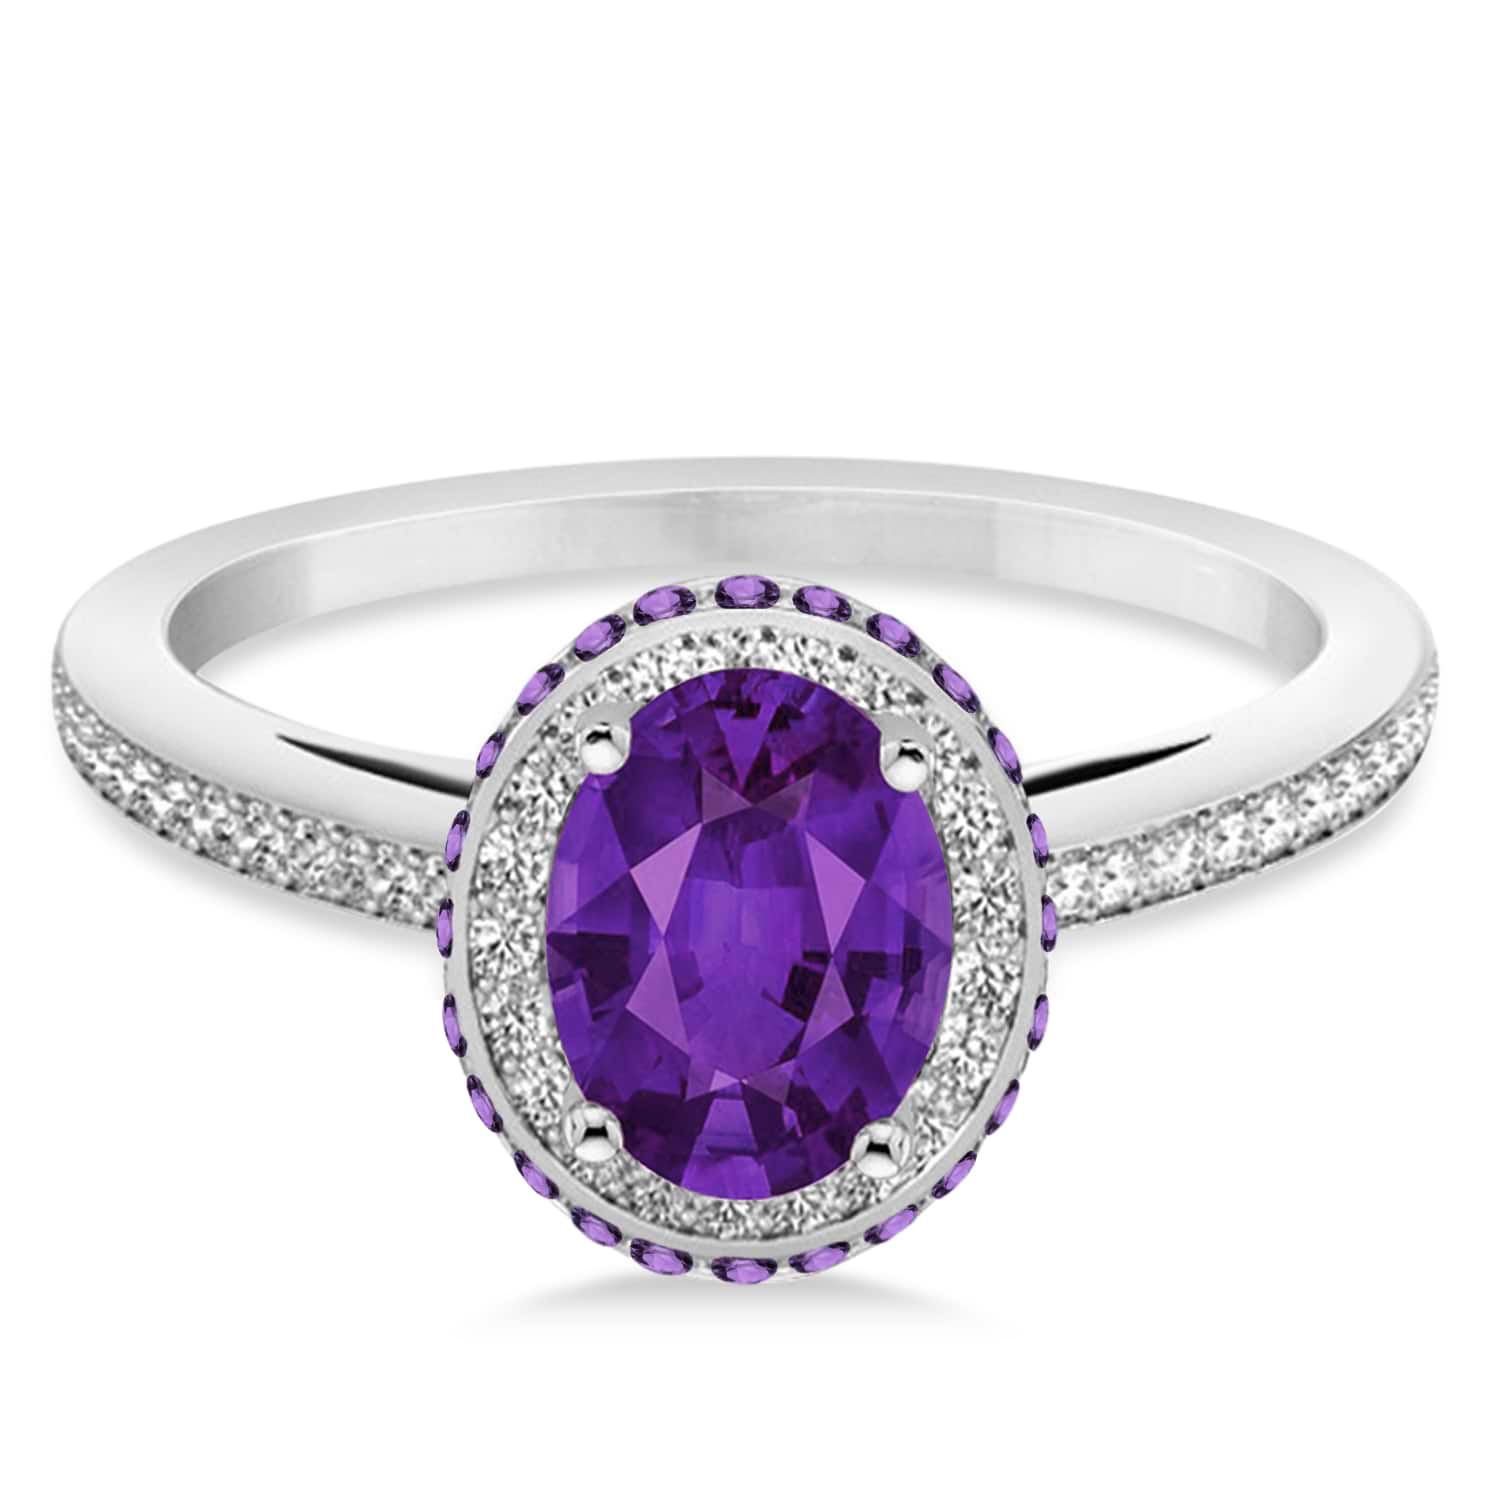 Oval Amethyst & Diamond Halo Engagement Ring 14k White Gold (1.75ct)